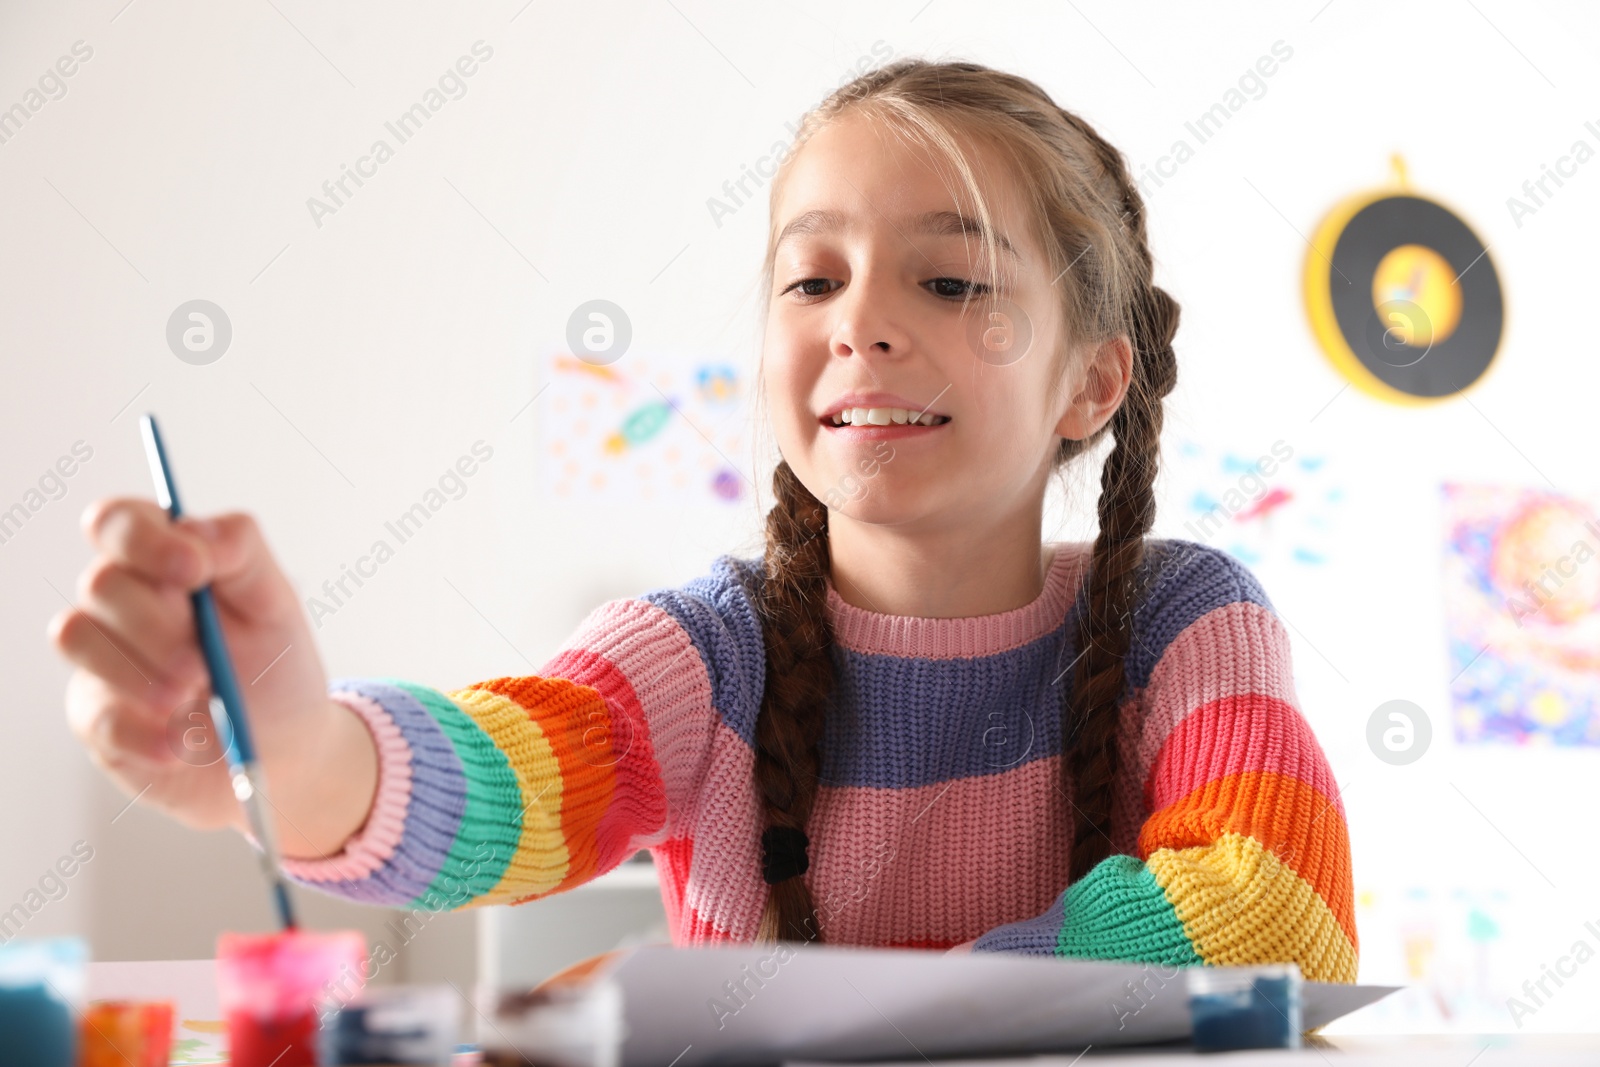 Photo of Little girl painting picture at table indoors